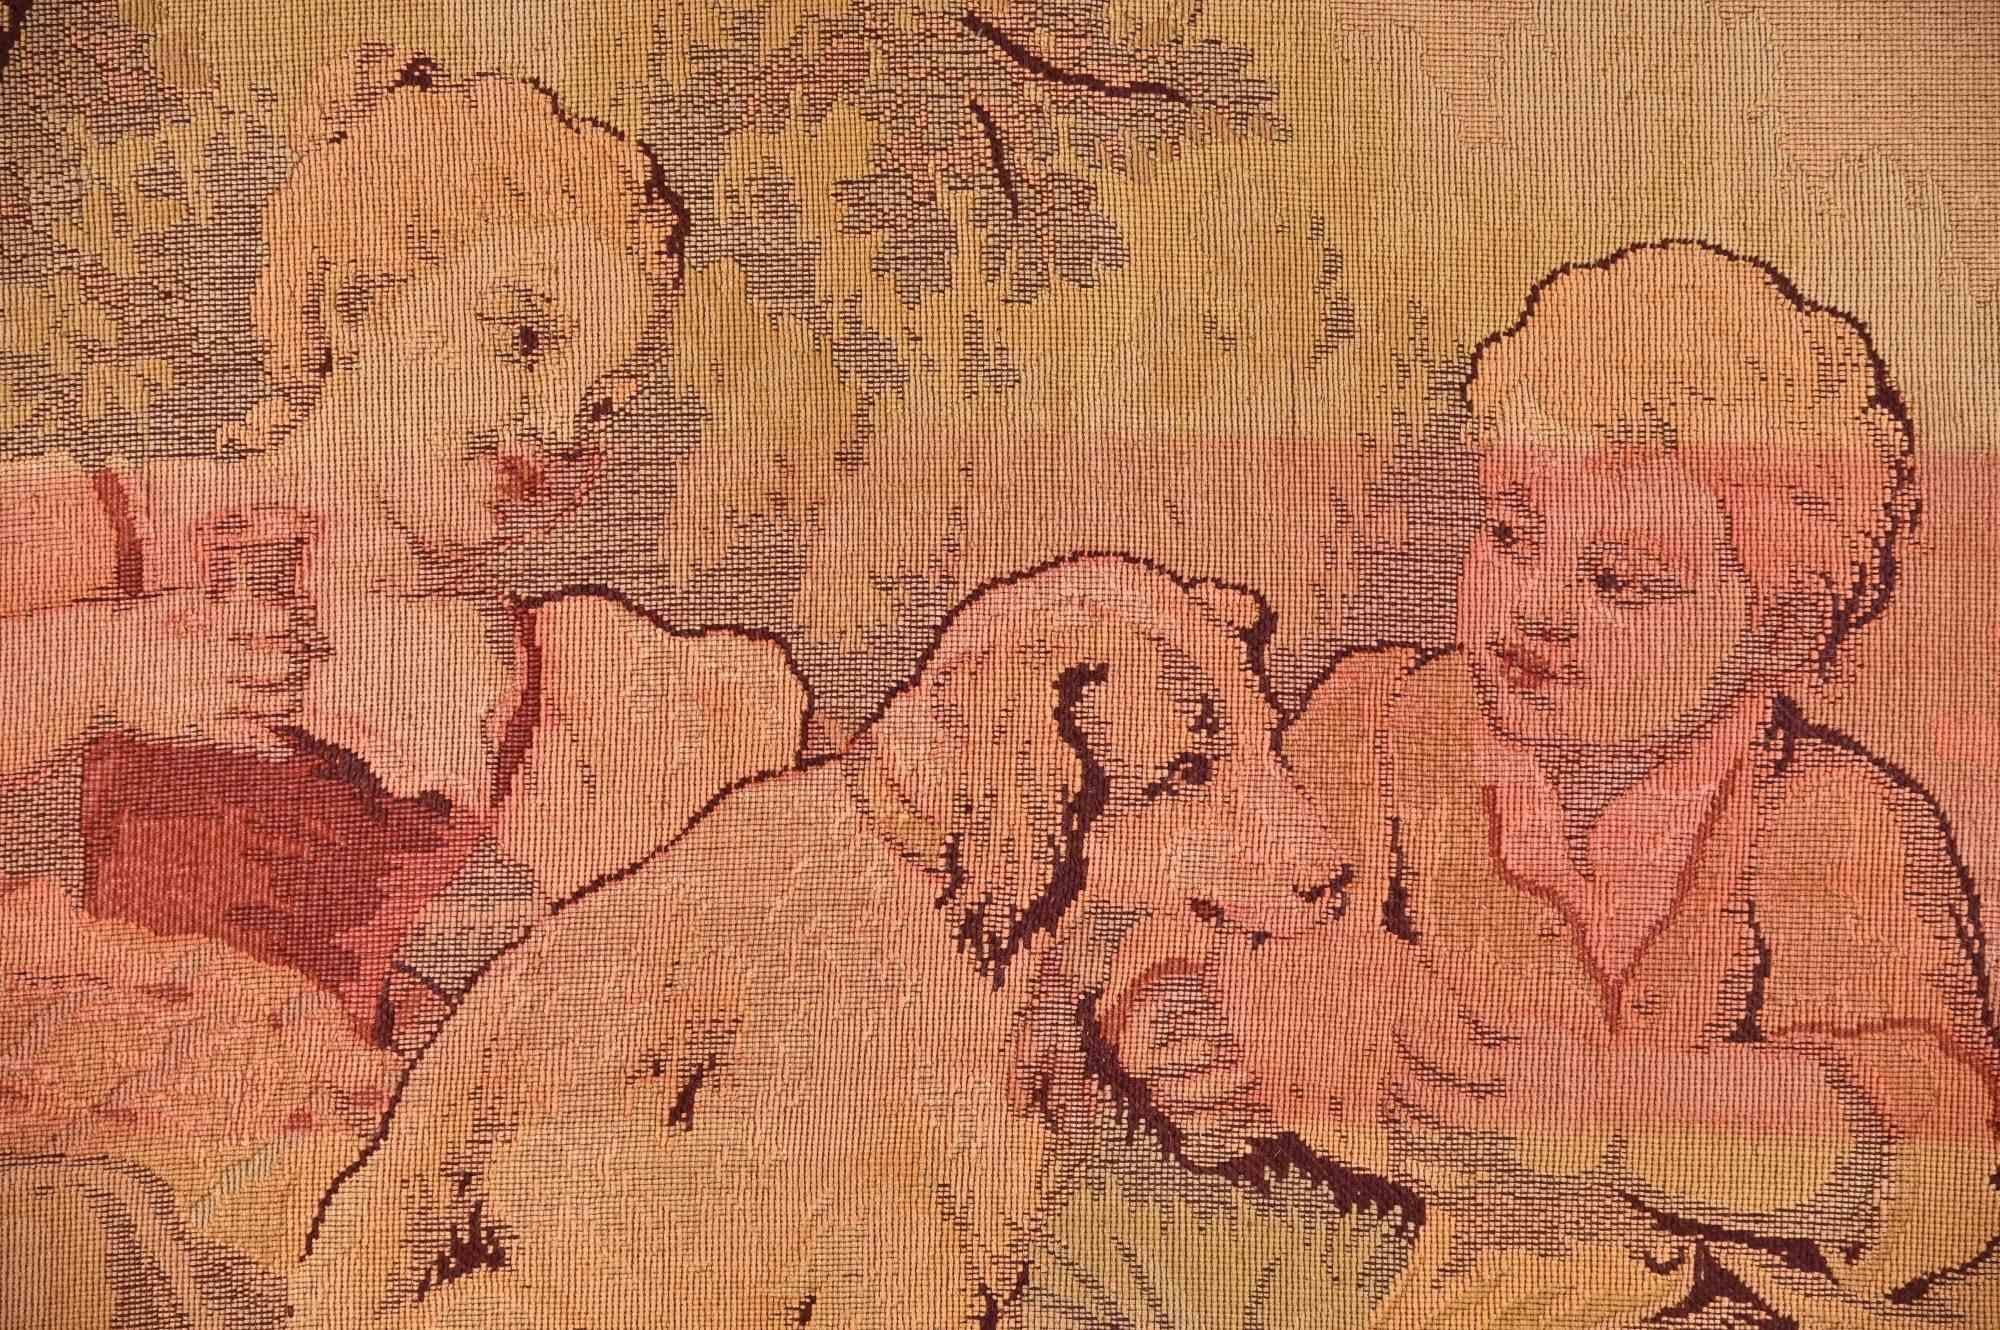 Bucolic scene is a vintage tapestry realized in 1950s in Italy. 

Children with dogs with floreal motifs on the sides.

Bold weaving in shades of brown, red and yellow. 

96x75 cm.

Good conditions